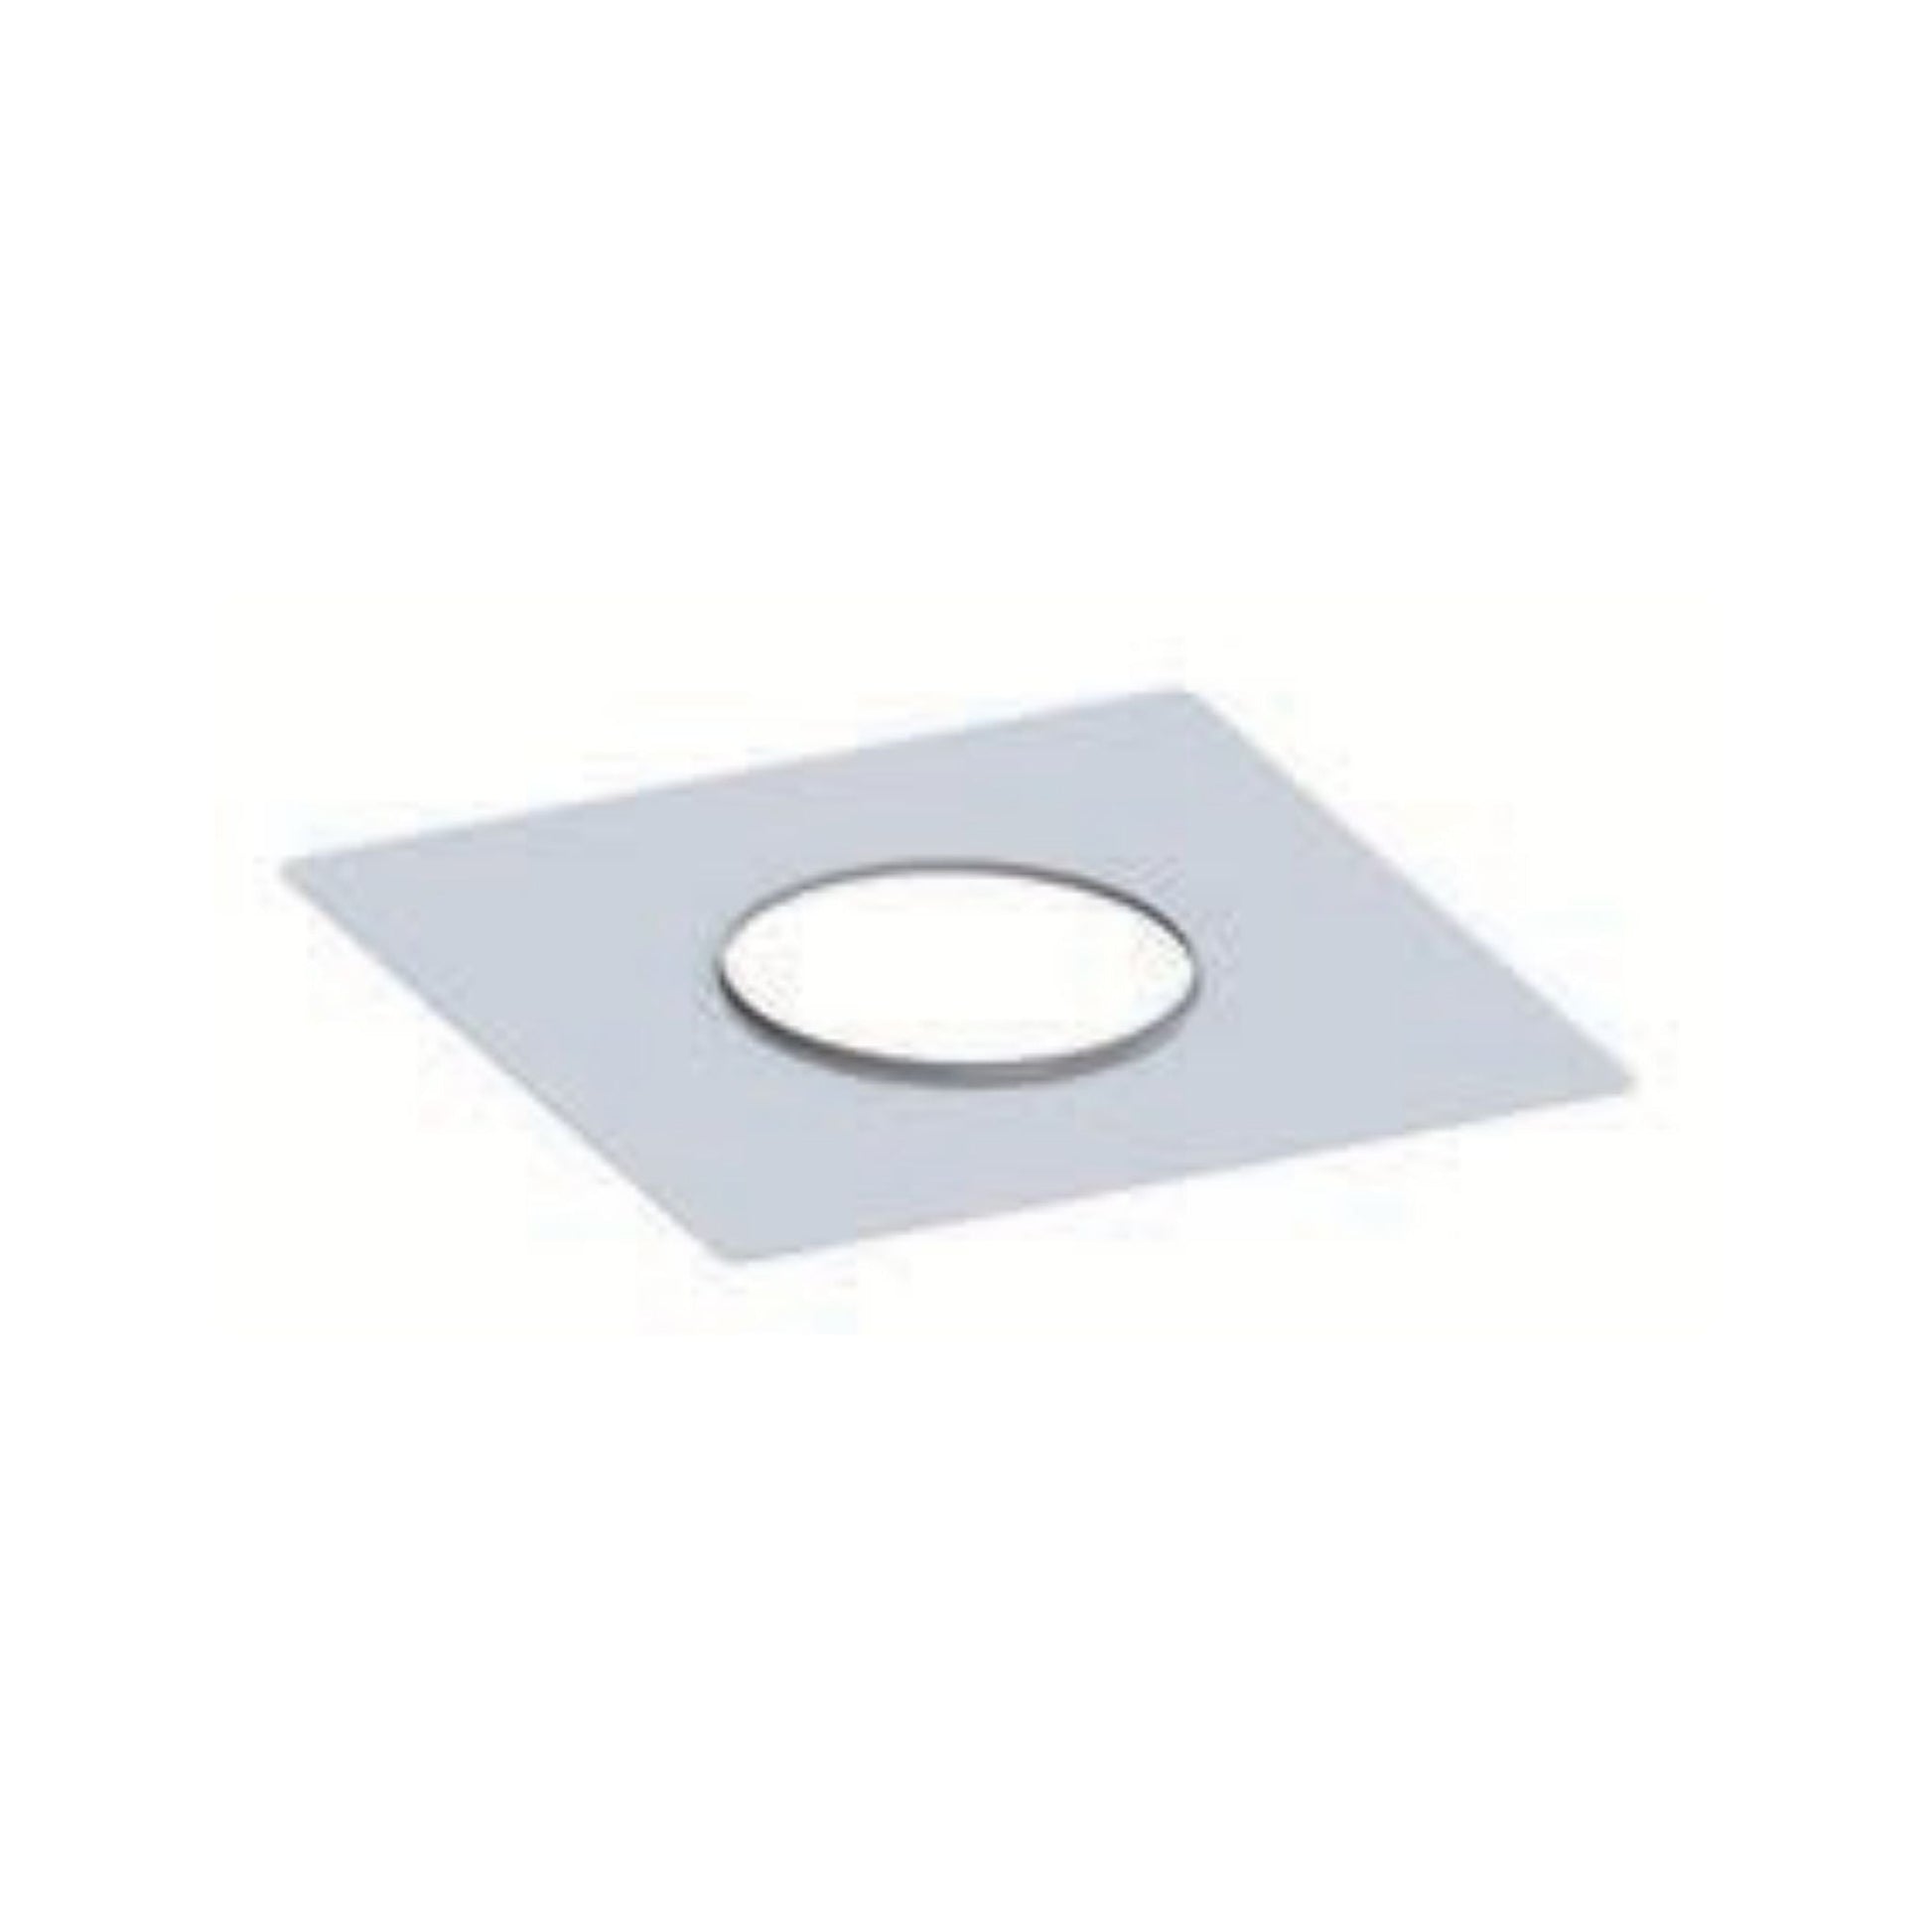 DuraVent FasNSeal Flex 3" Stainless Steel Top Cover Plate